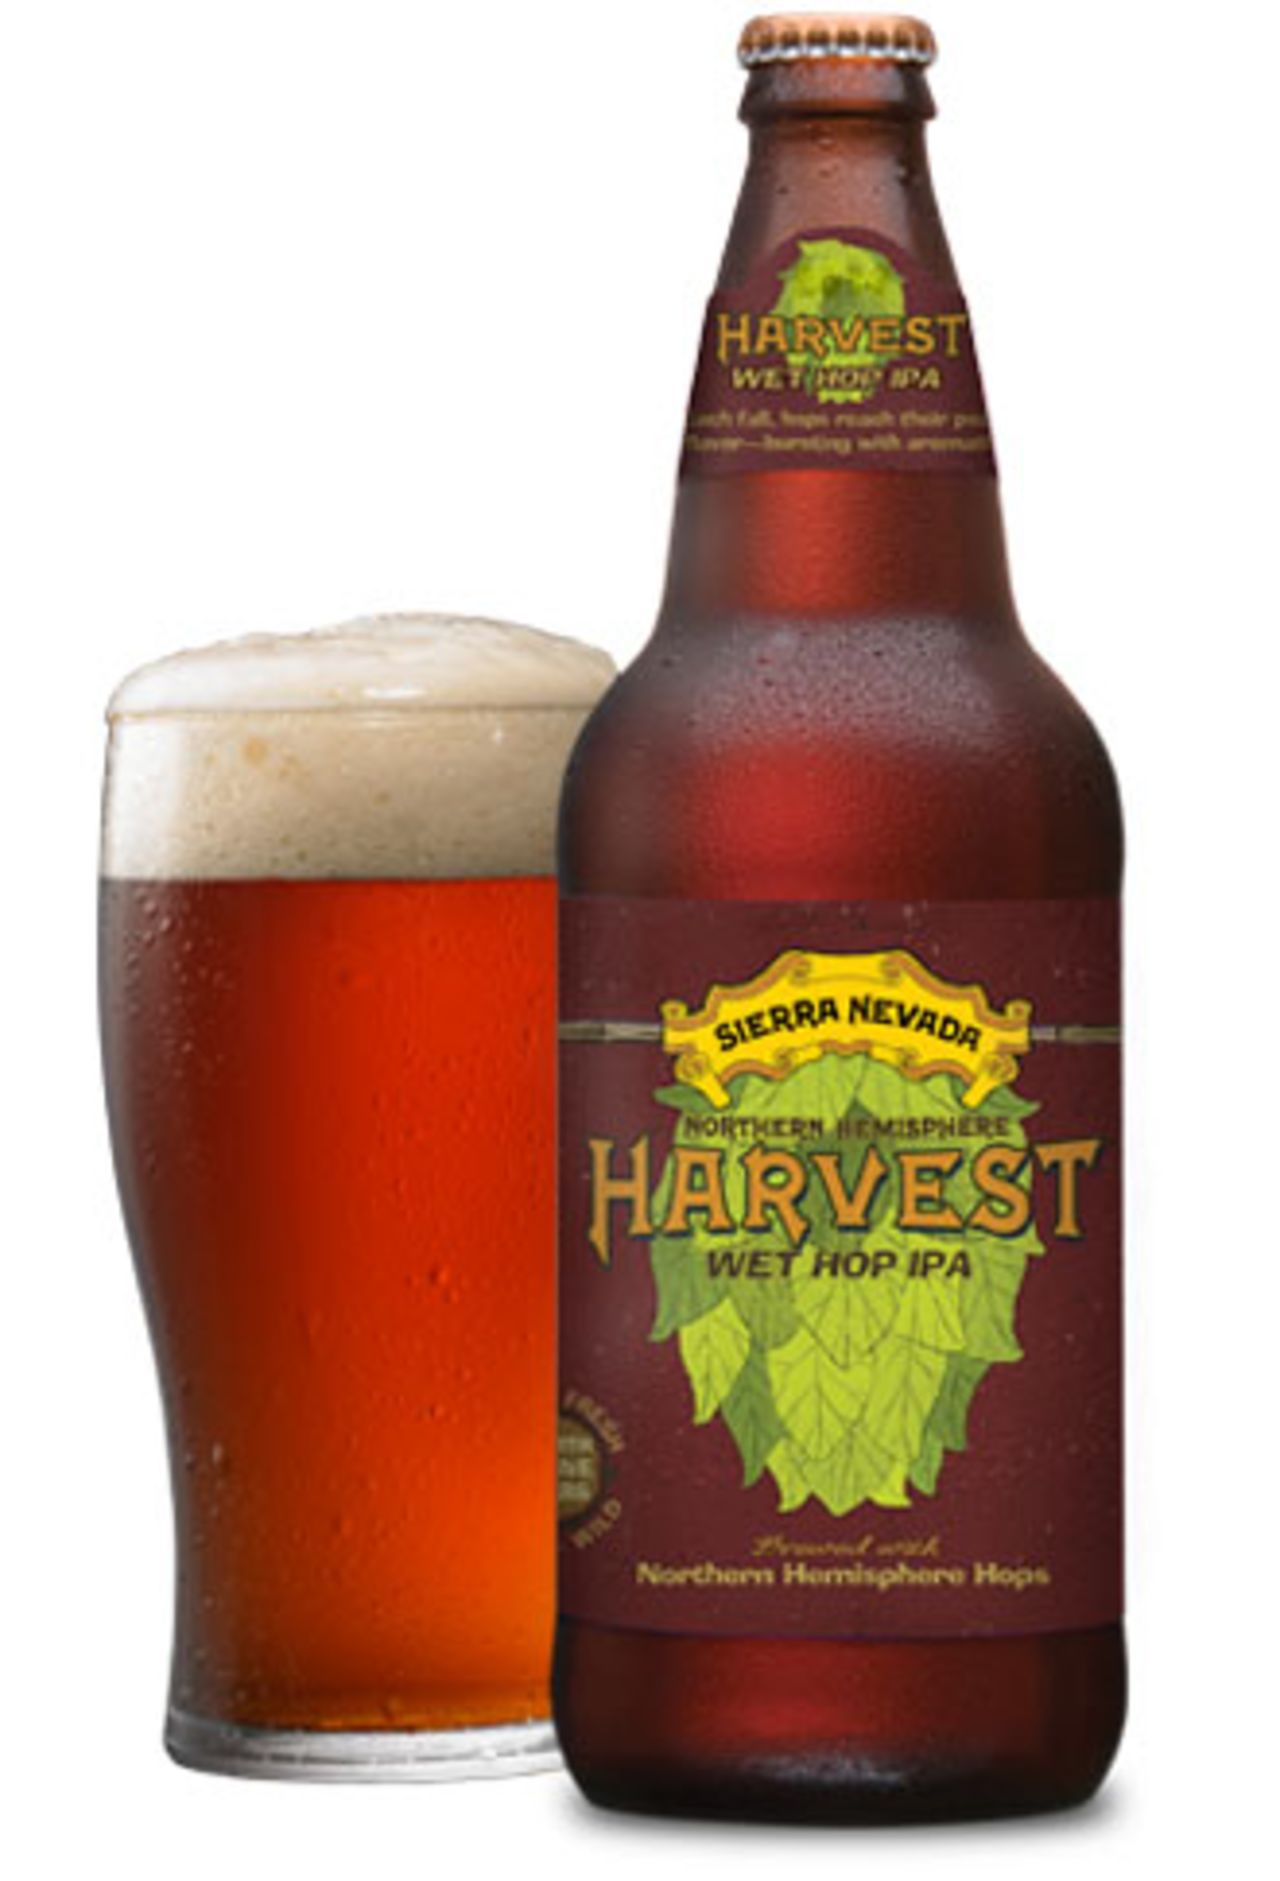 <strong>Sierra Nevada</strong> also brews an acclaimed <strong>Harvest Wet Hop IPA</strong>. The brewer claims that using wet hops "preserves all of the (hops') precious oils and resins for a unique drinking experience."